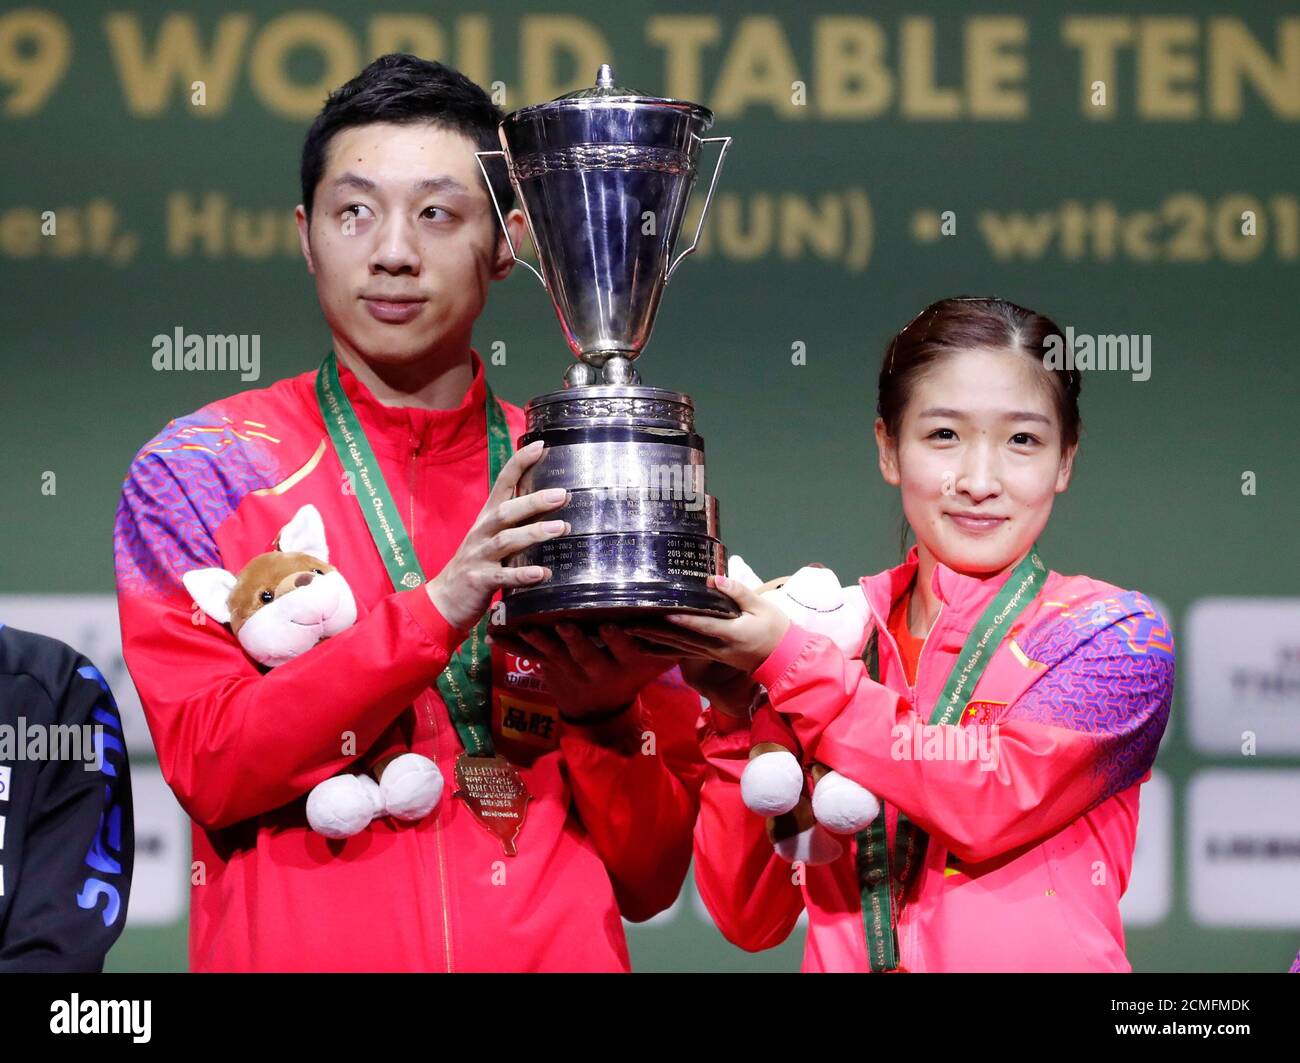 Table Tennis - 2019 World Table Tennis Championships - Hungexpo, Budapest,  Hungary - April 26, 2019. Gold medalists Xu